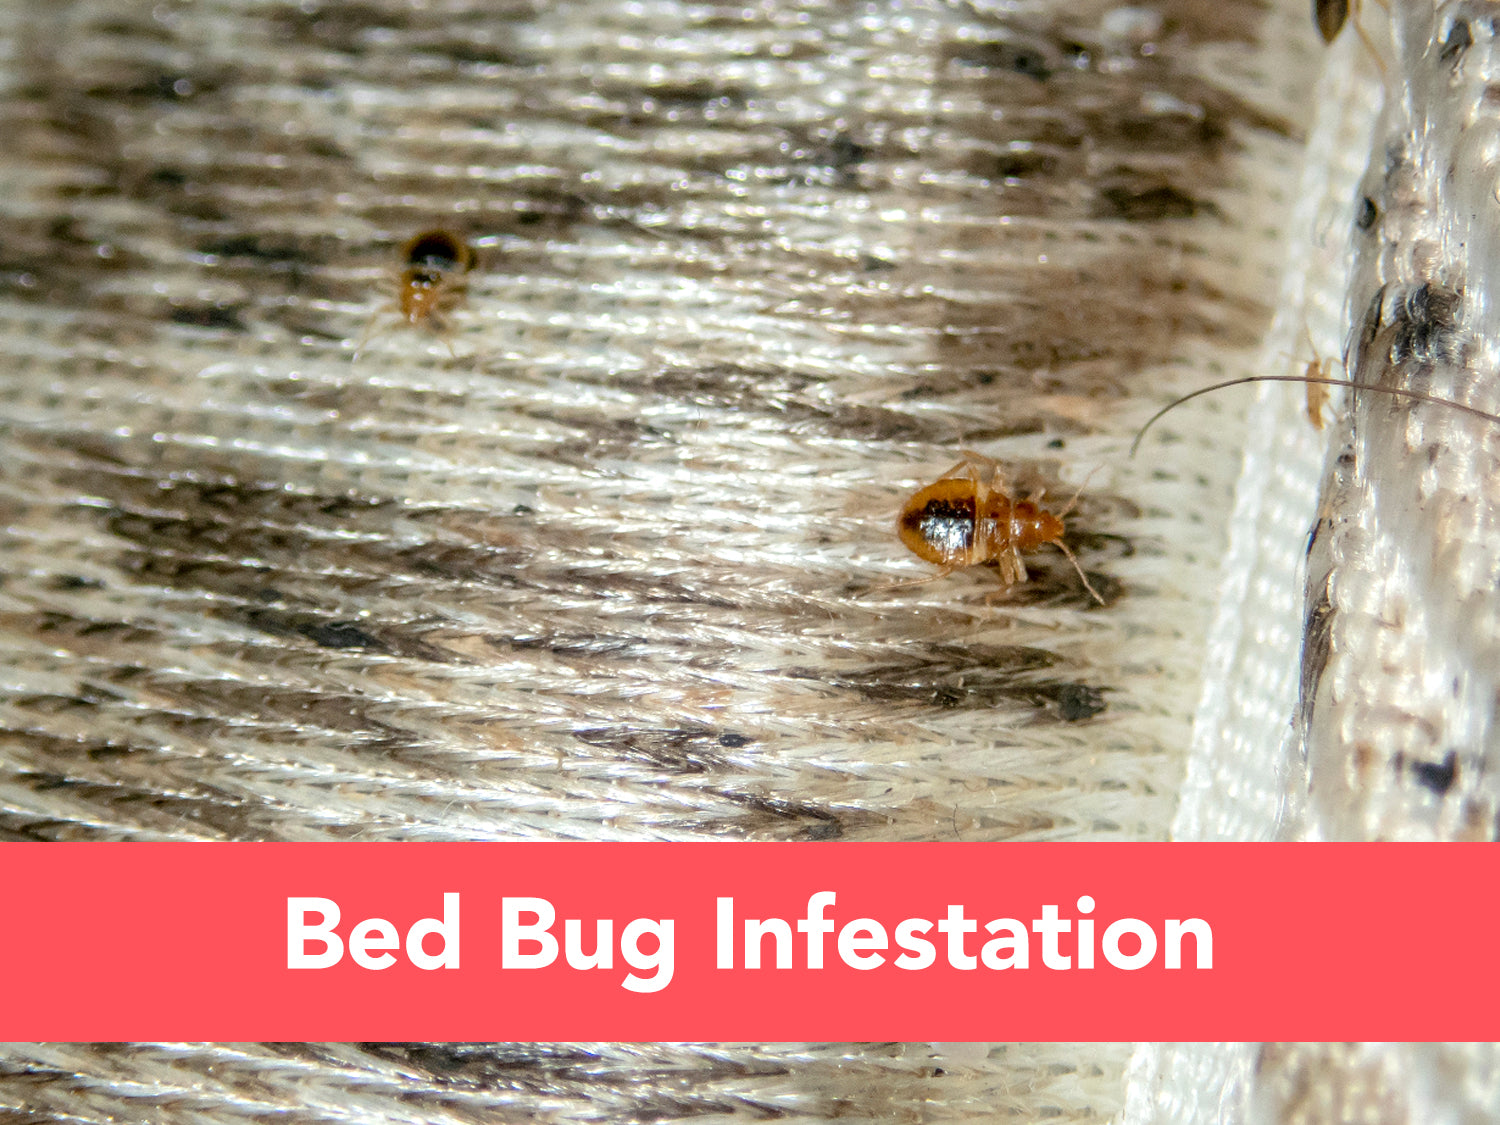 How to Check for a Bed Bug Infestation